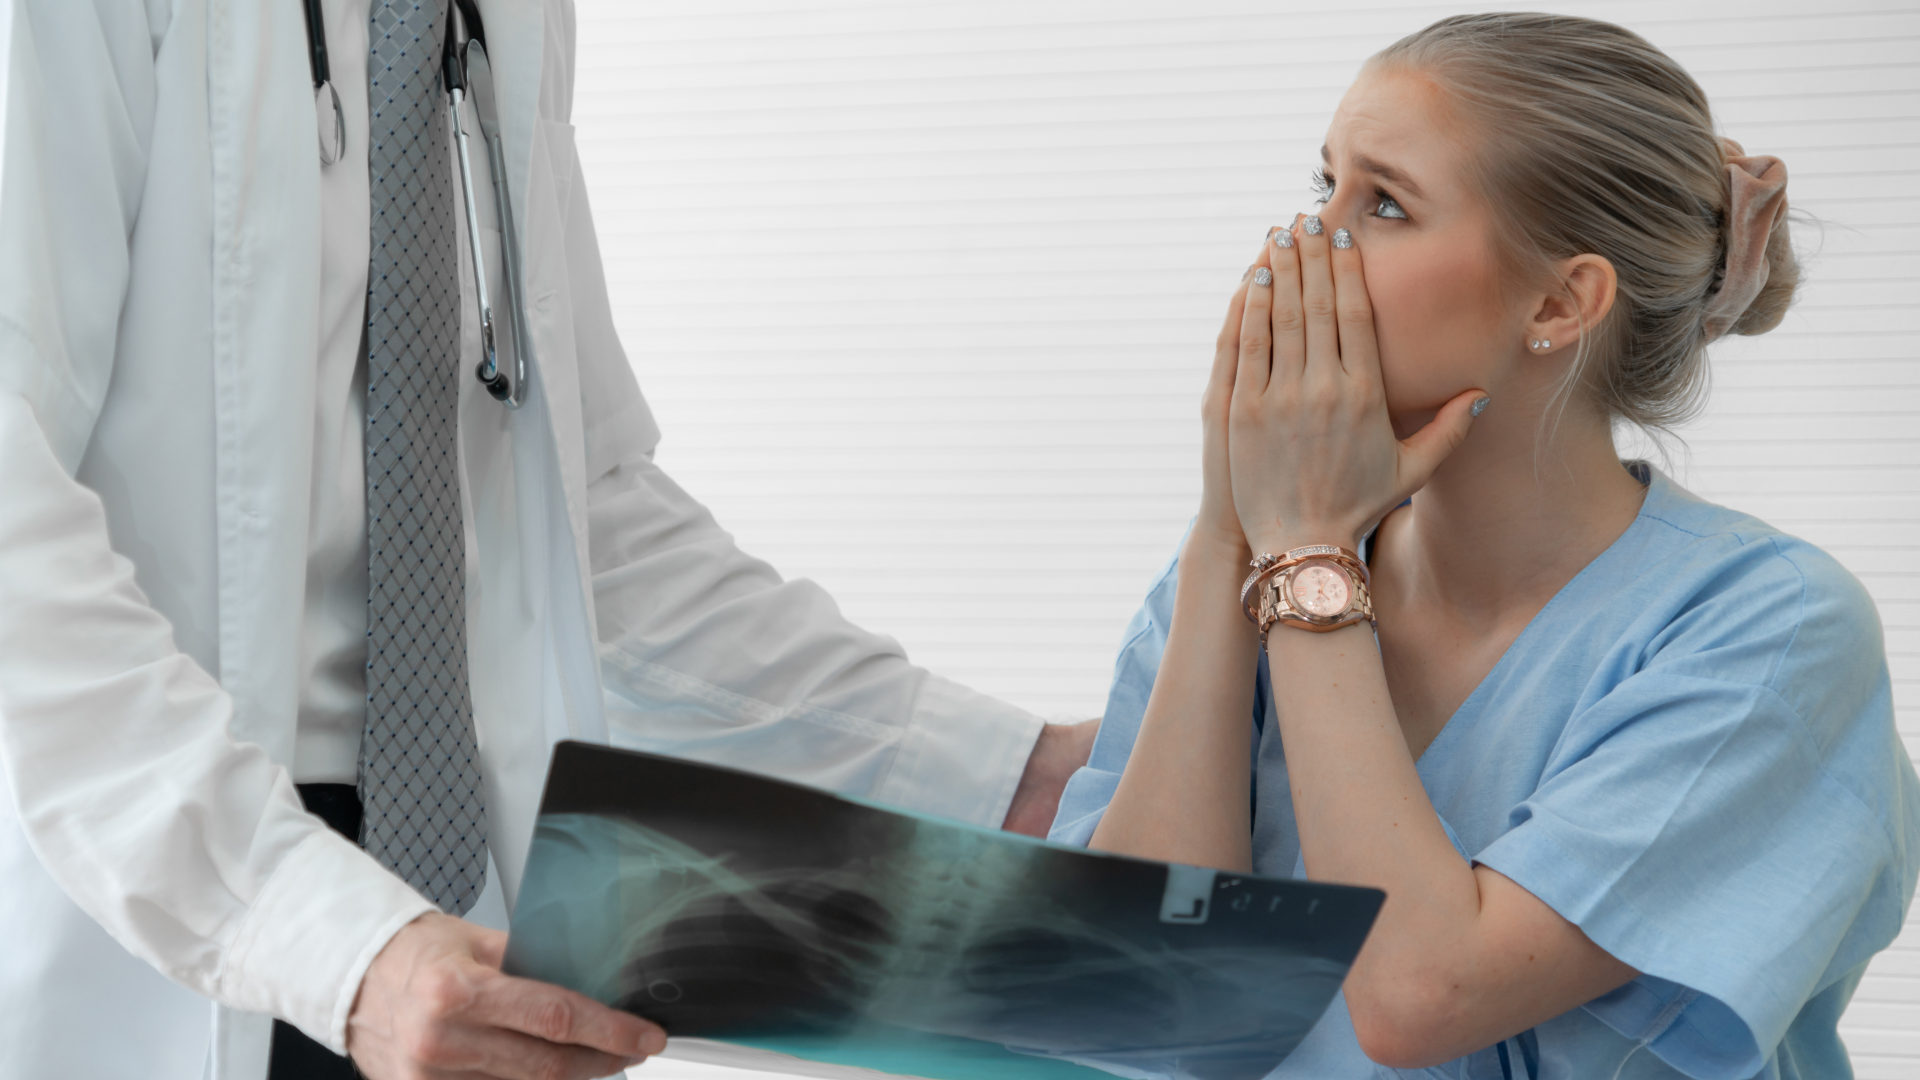 A patient is shocked as their doctor presents their x-ray results